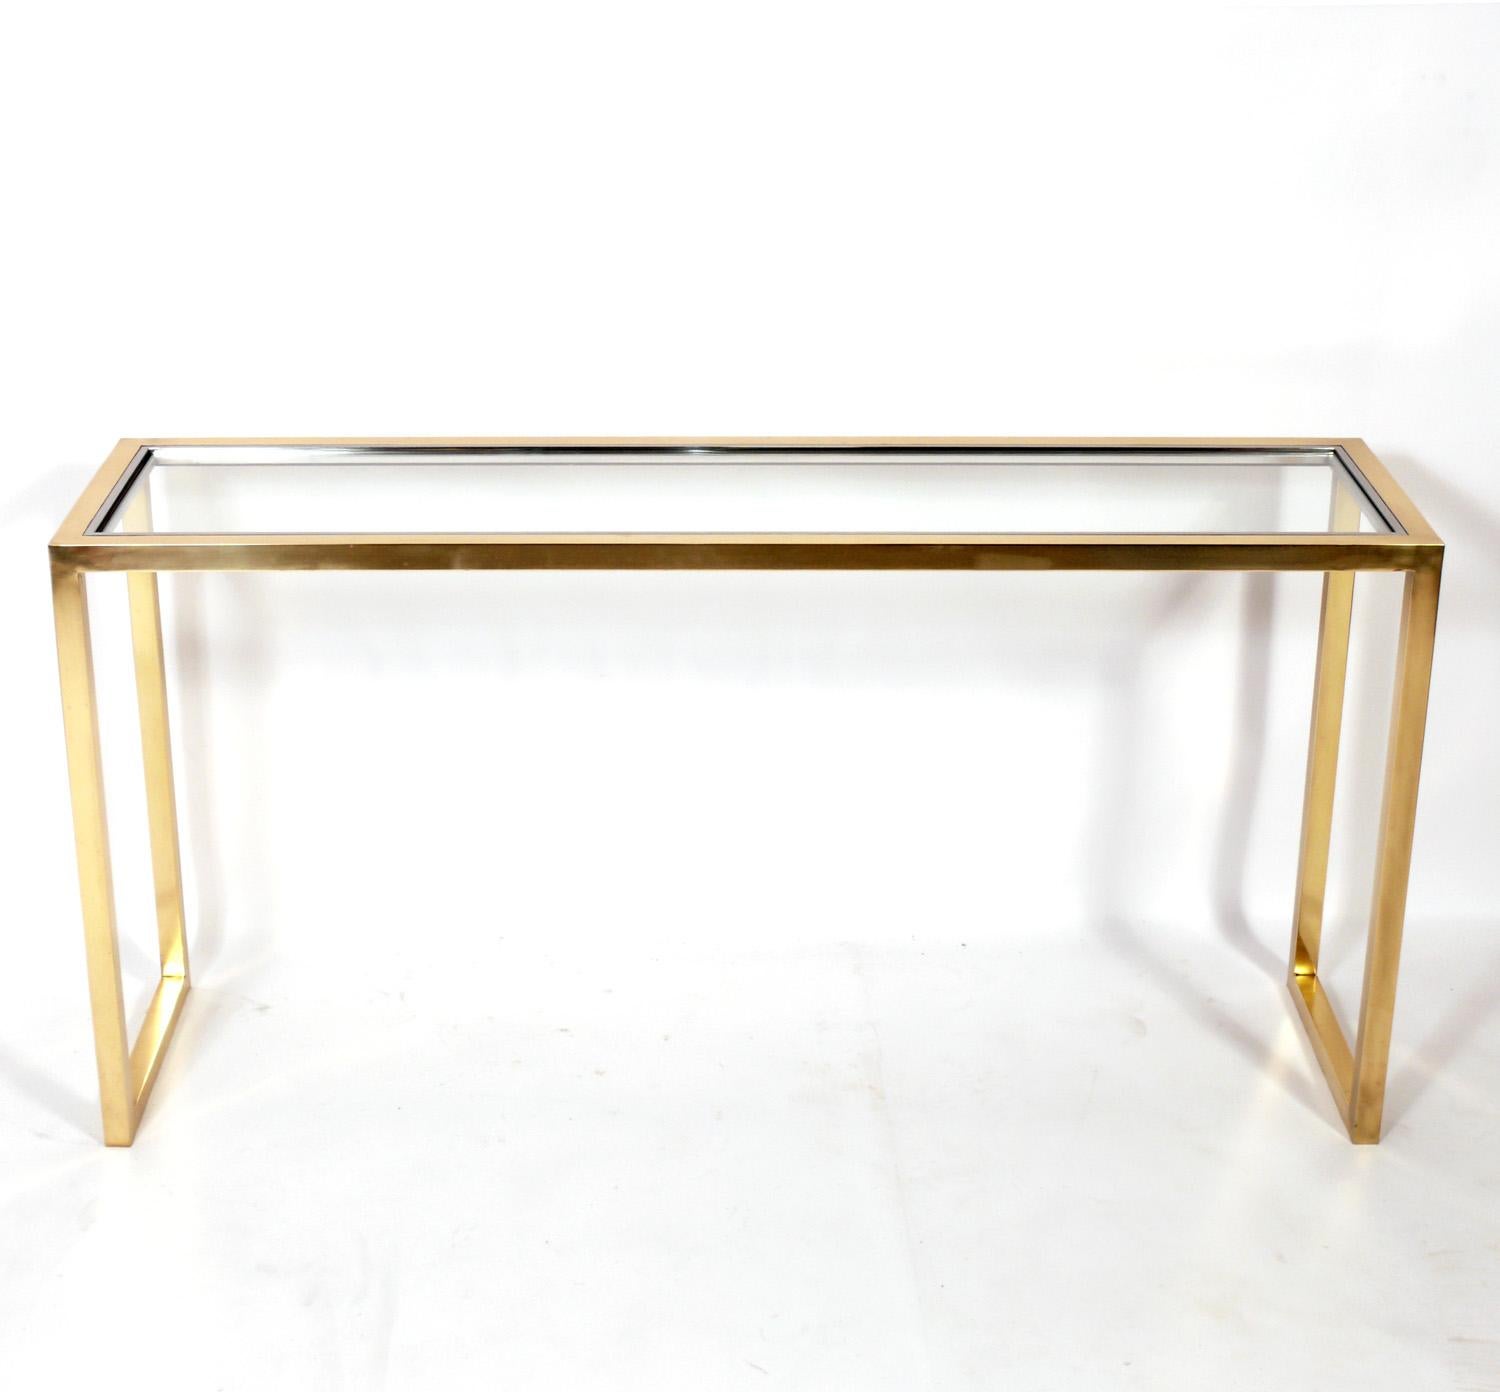 Clean lined modern console or sofa table, American, circa 1980s. This table is a versatile size and can be used as a console table, sofa table, desk, or vanity.